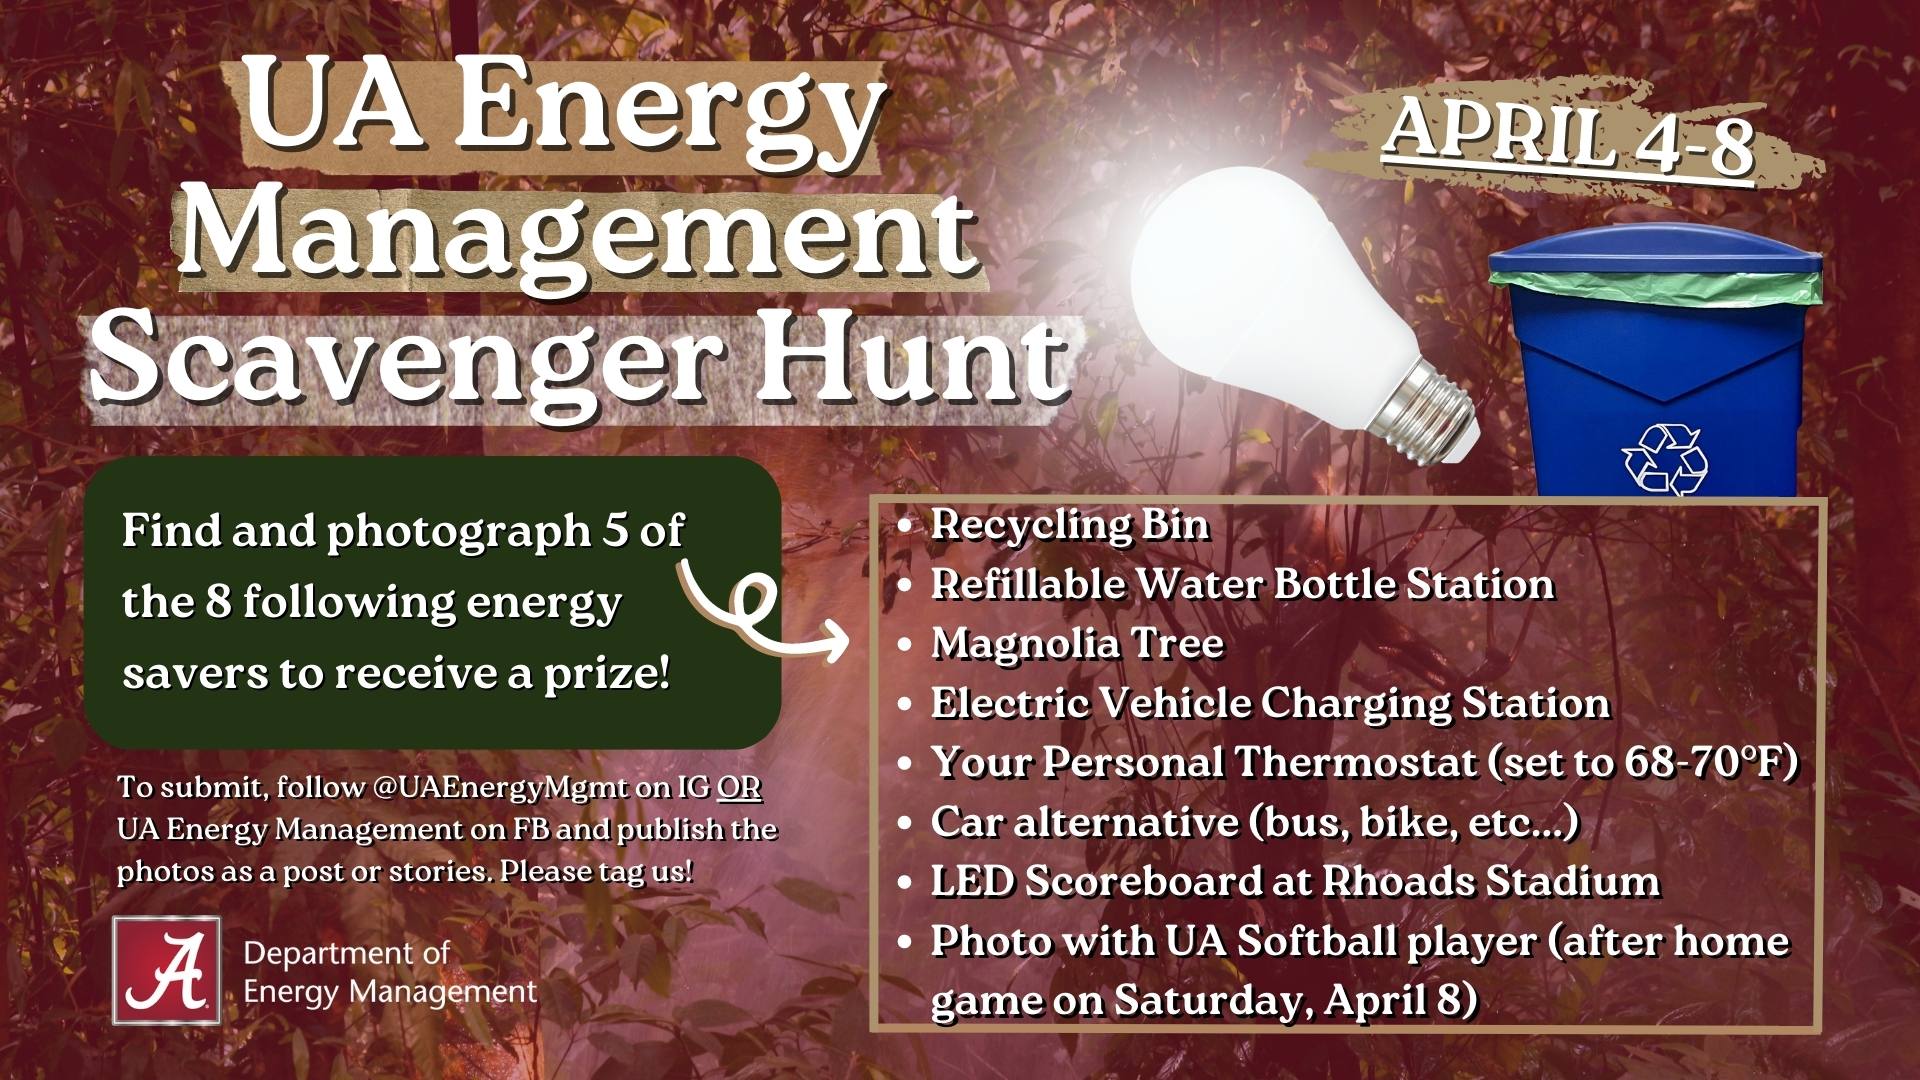 "UA Energy Management Scavenger Hunt, April 4-8, Find and photograph 5 of the 8 following energy savers to receive a prize! Recycling bin, refillable water bottle station, magnolia tree, electric vehicle charging station, your personal thermostat (set to 68-70F), car alternative (bus, bike, etc...), LED scoreboard at Rhoads Stadium, photo with UA Softball player (after home game on Saturday, April 8). To submit, follow @UAEnergyMgmt on IG OR UA Energy Management on FB and publish the photos as a post or stories. Please tag us! The Department of Energy Management